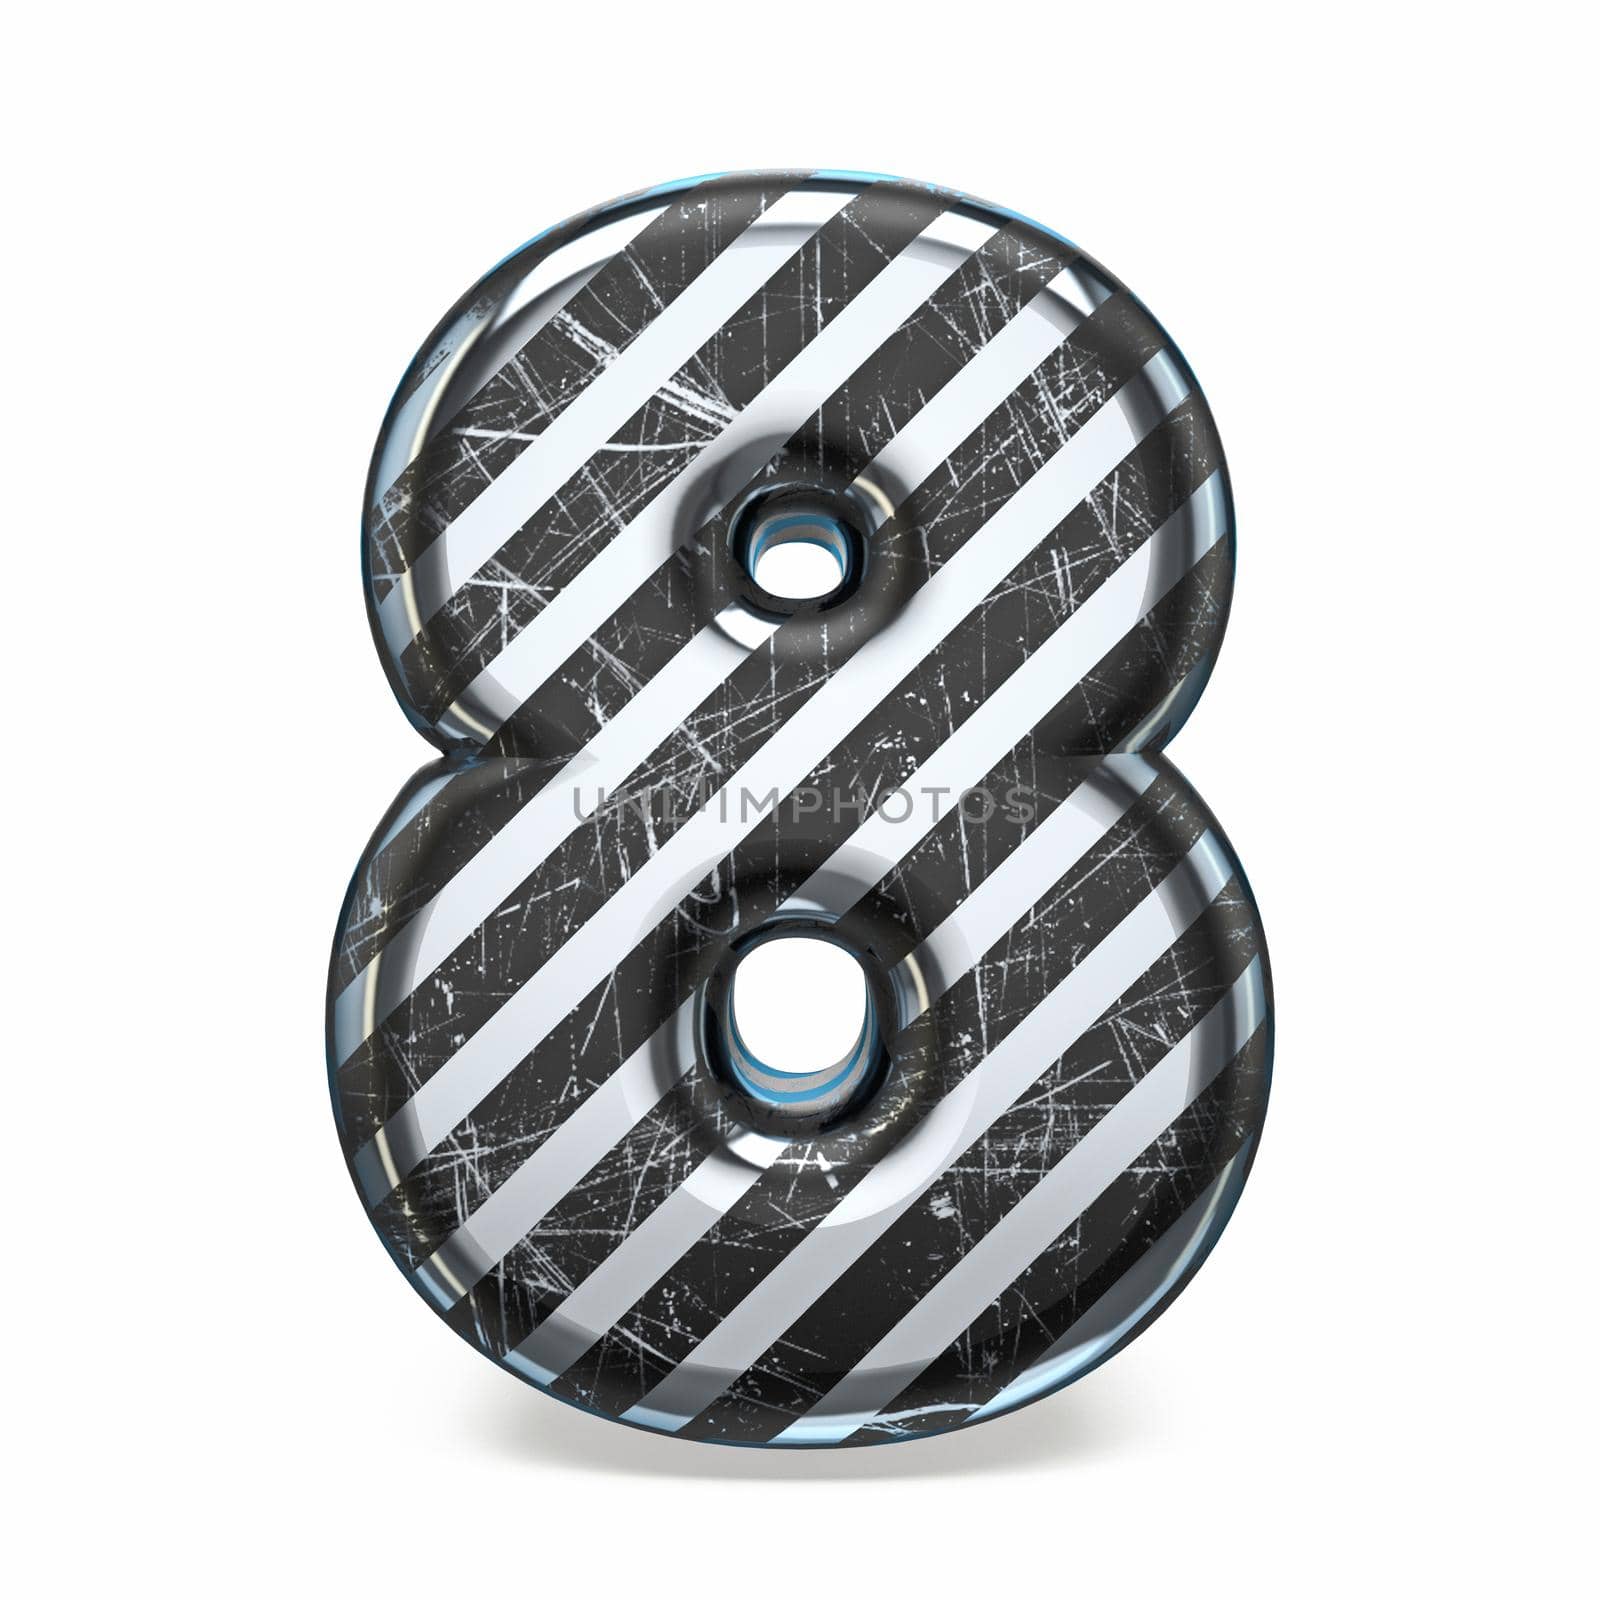 Striped steel black scratched font Number 8 EIGHT 3D render illustration isolated on white background